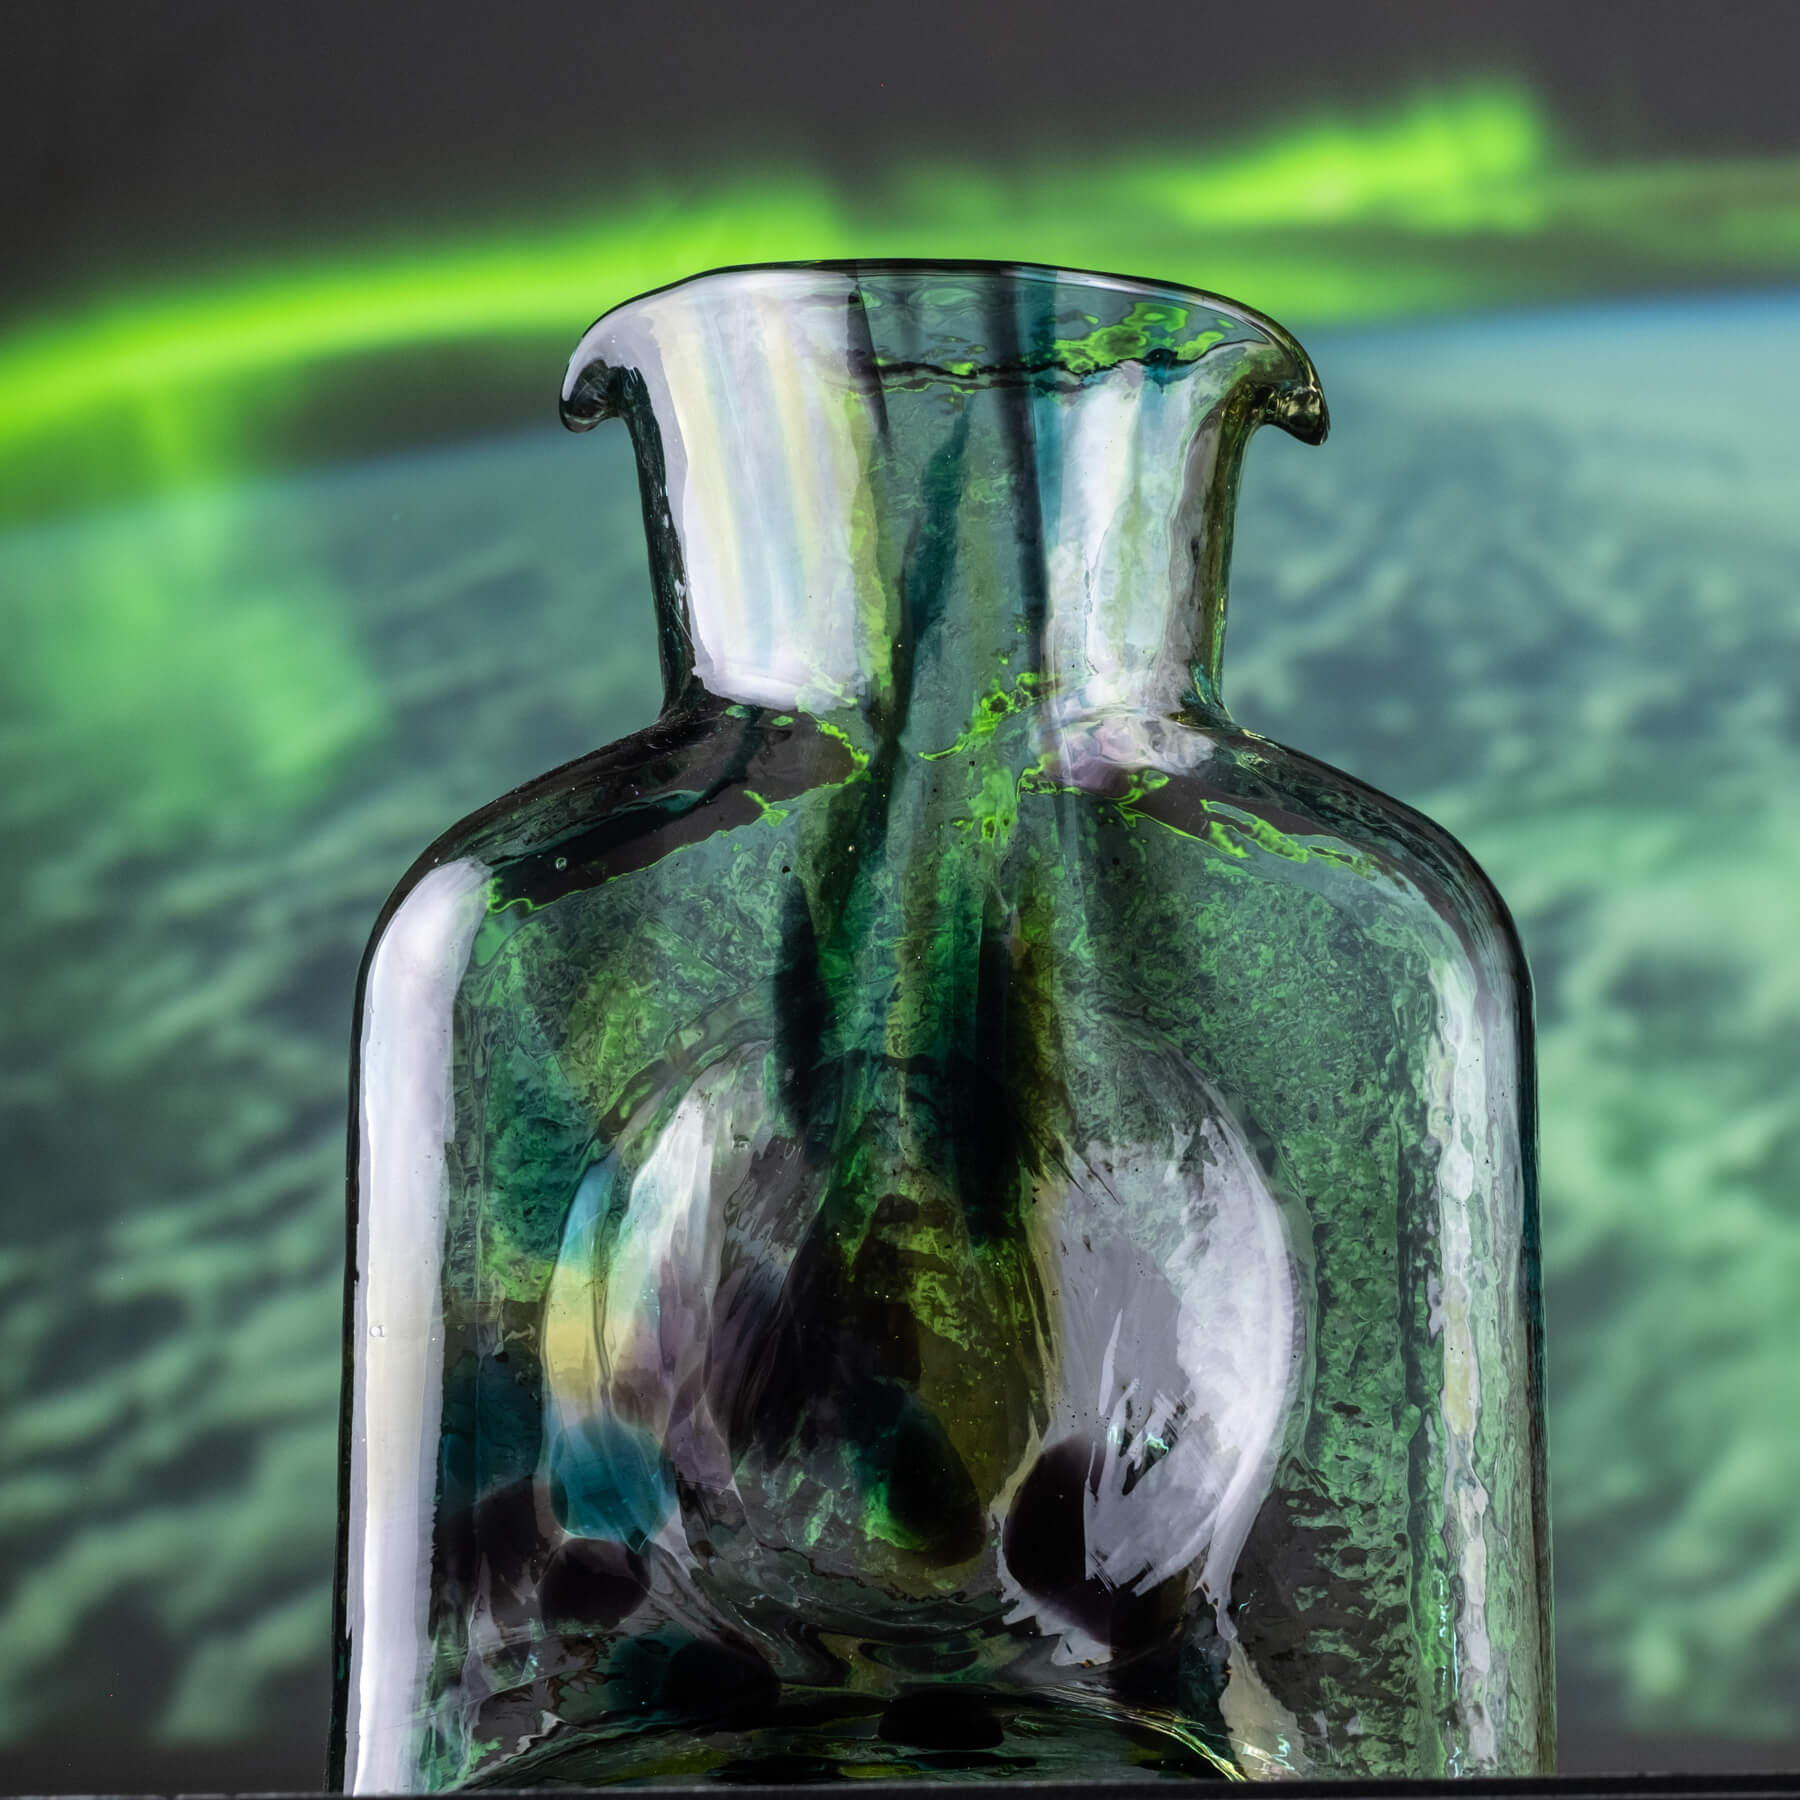 Special Edition 384 Water Bottle - Northern Lights